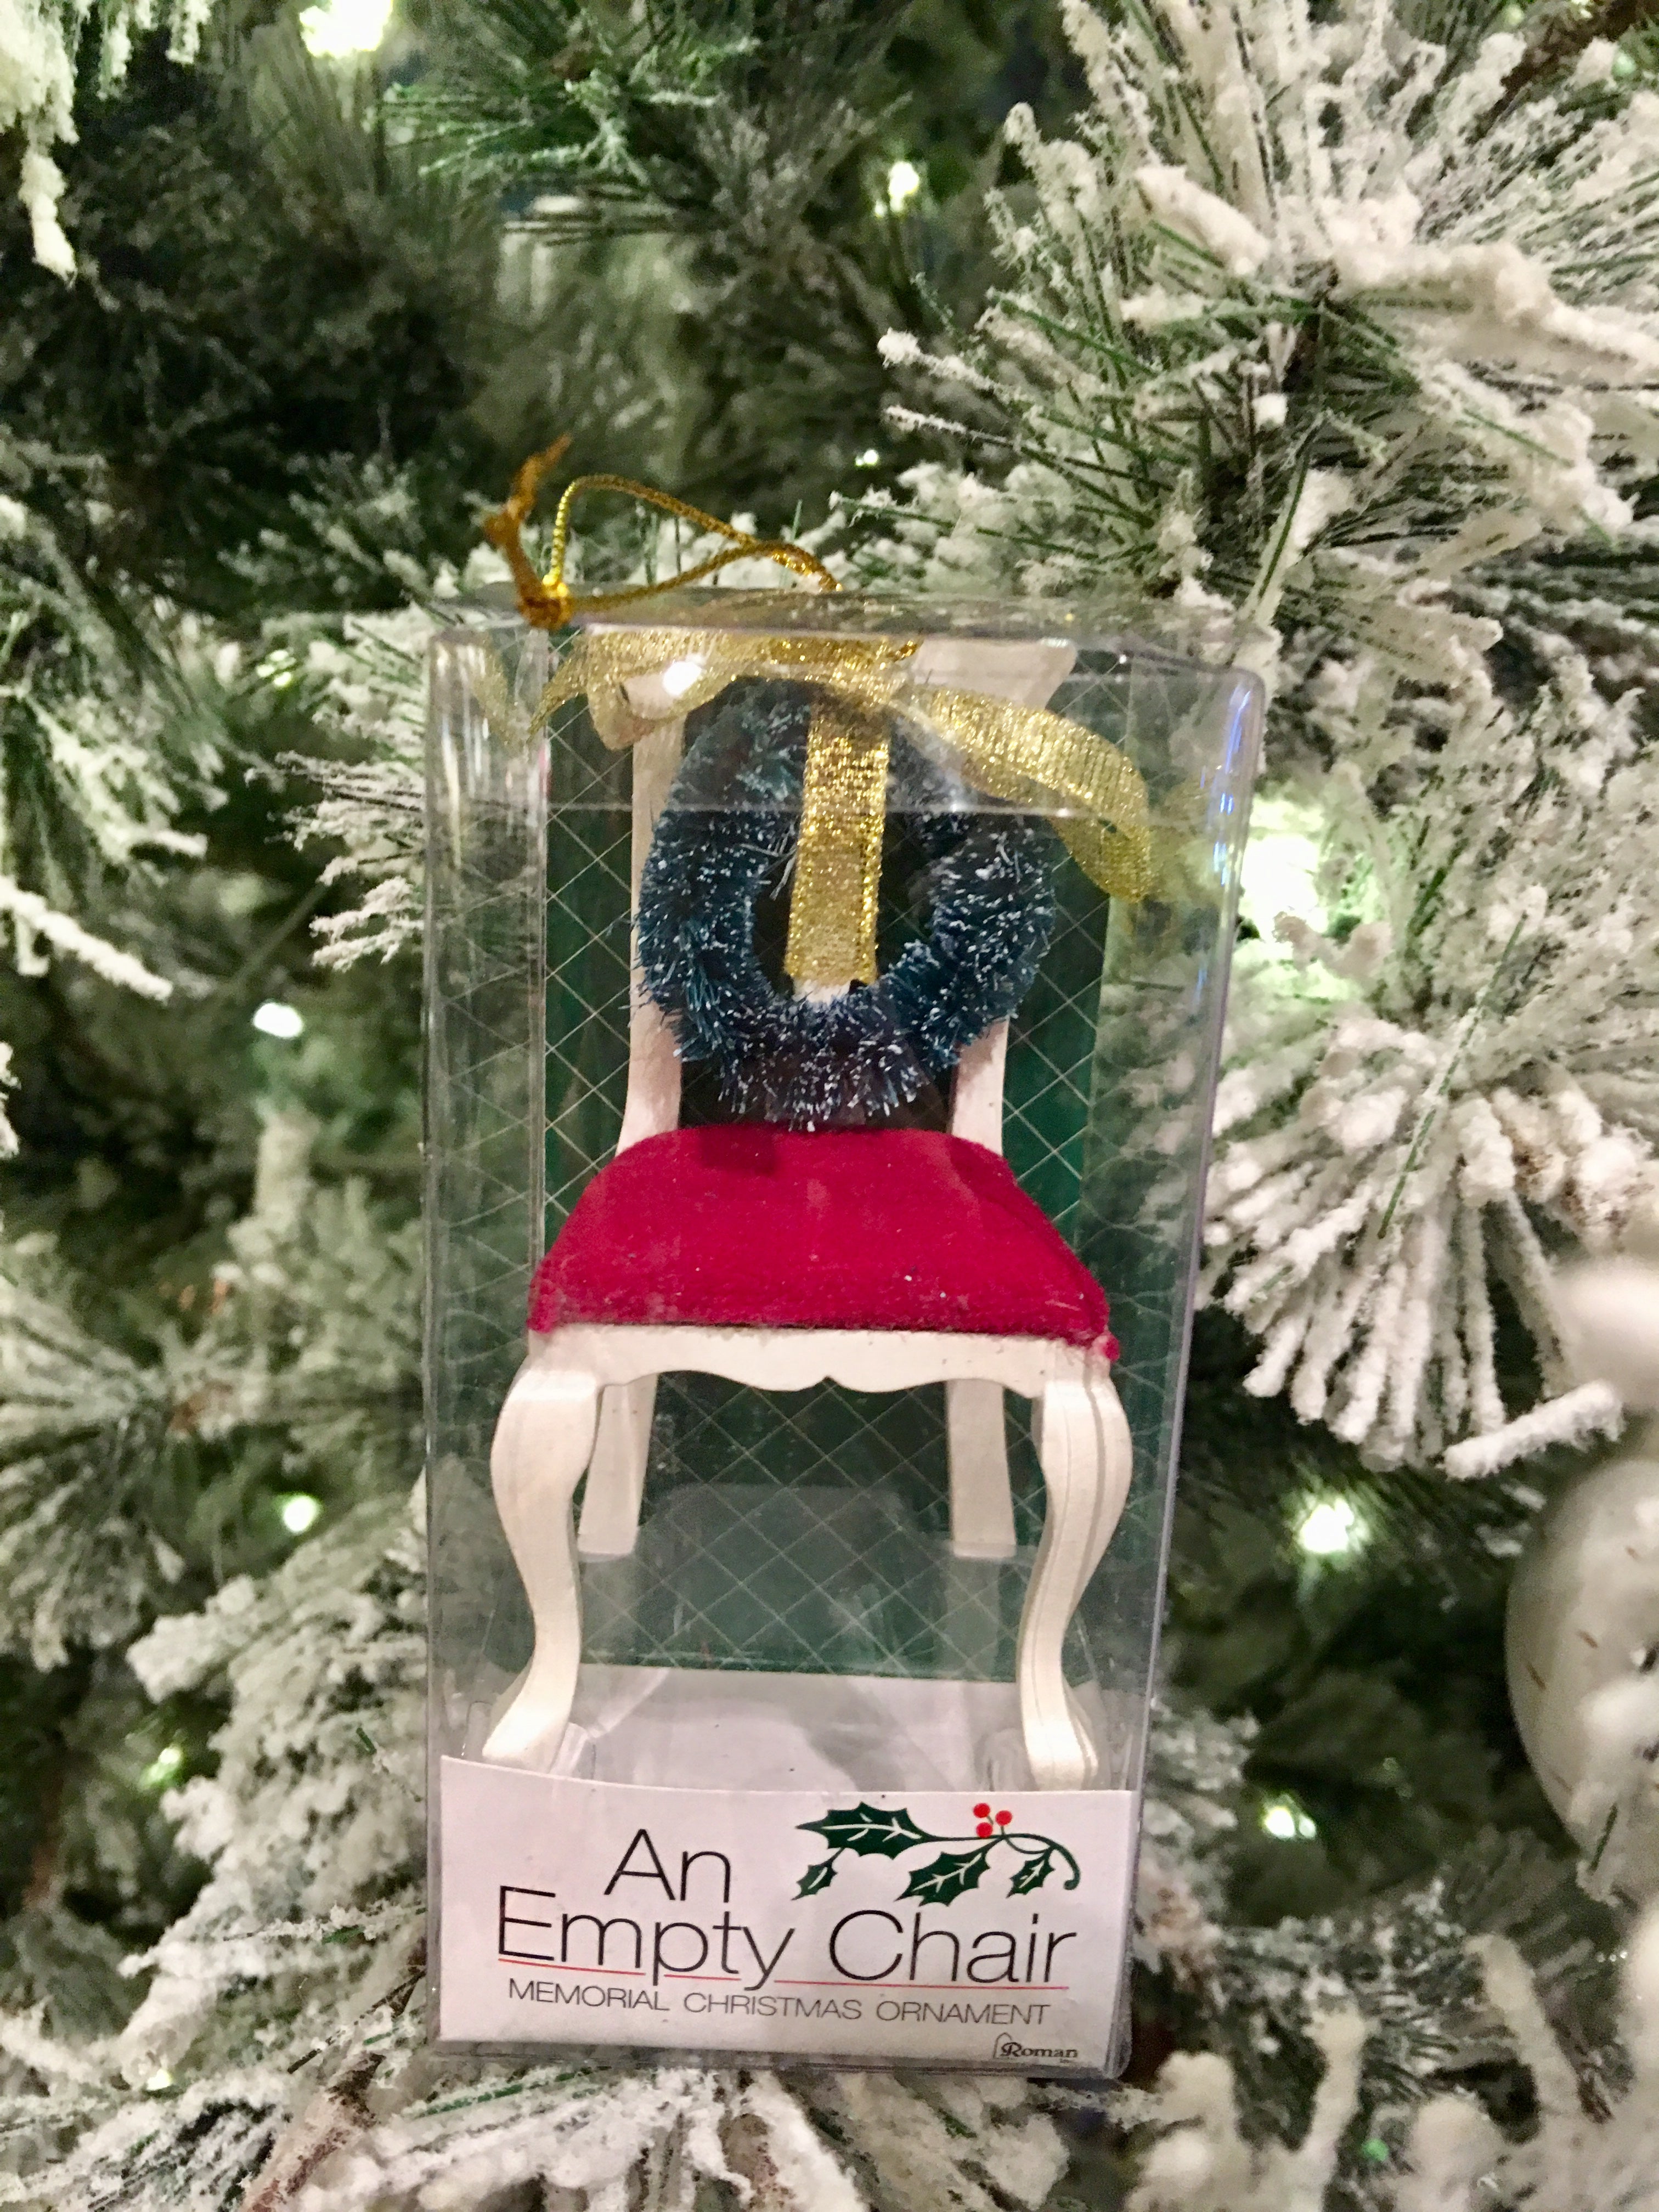 Empty chair ornament